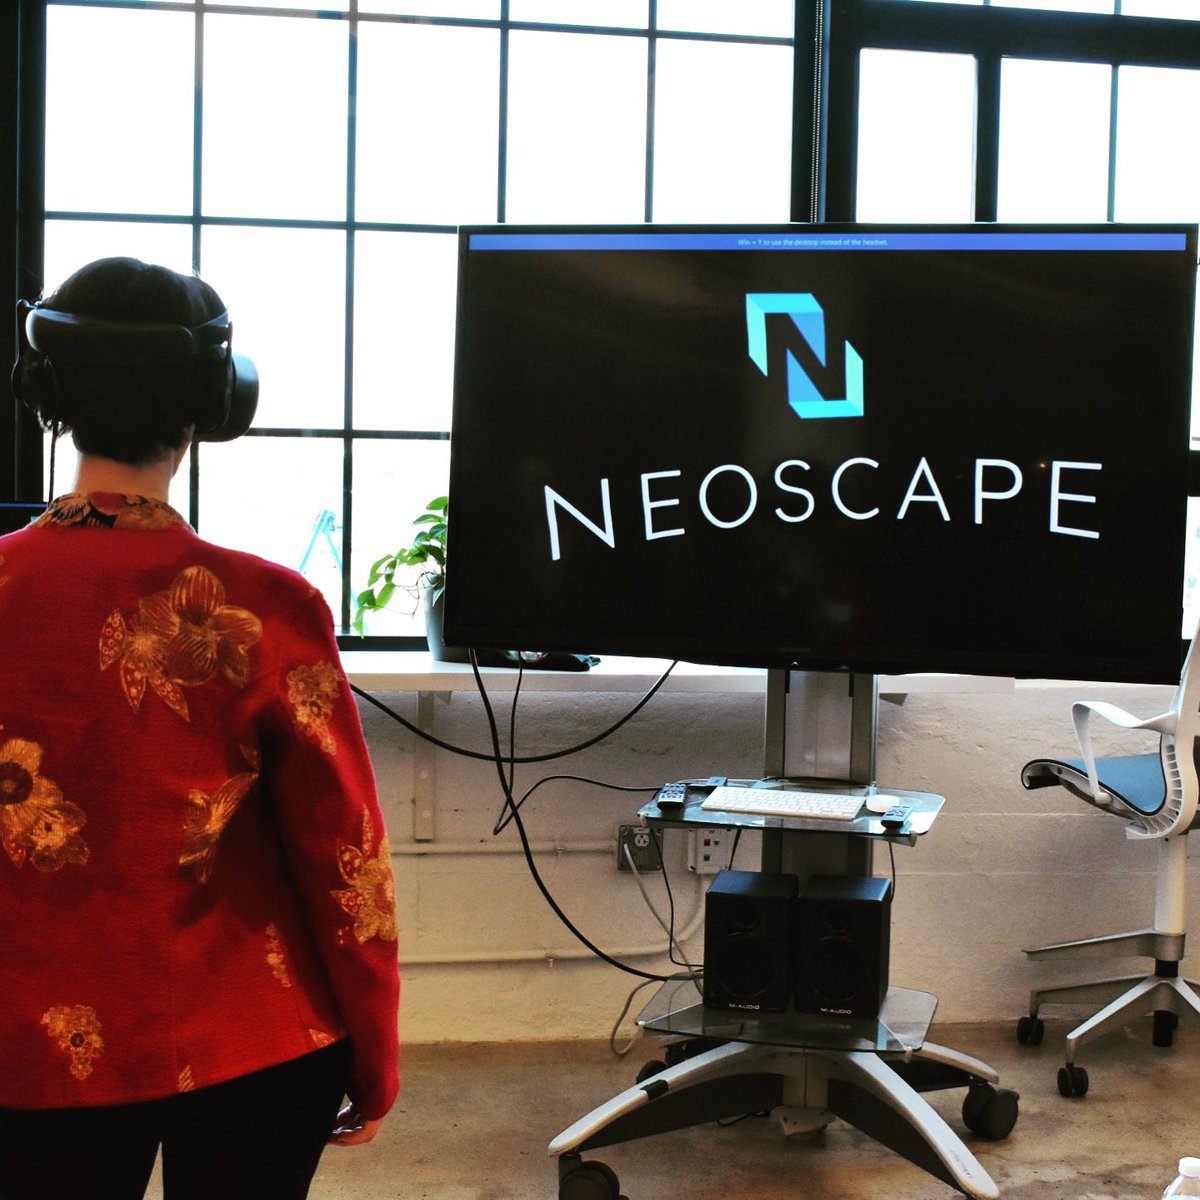 The “Show Don’t Tell” @BosDesignWeek event last night @NeoscapeInc was so cool. We learned about the latest virtual and augmented reality technology! #virtualreality #augmentedreality #designweek #boston #creativeagency #seaportboston #brandexperience #digitalmarketing